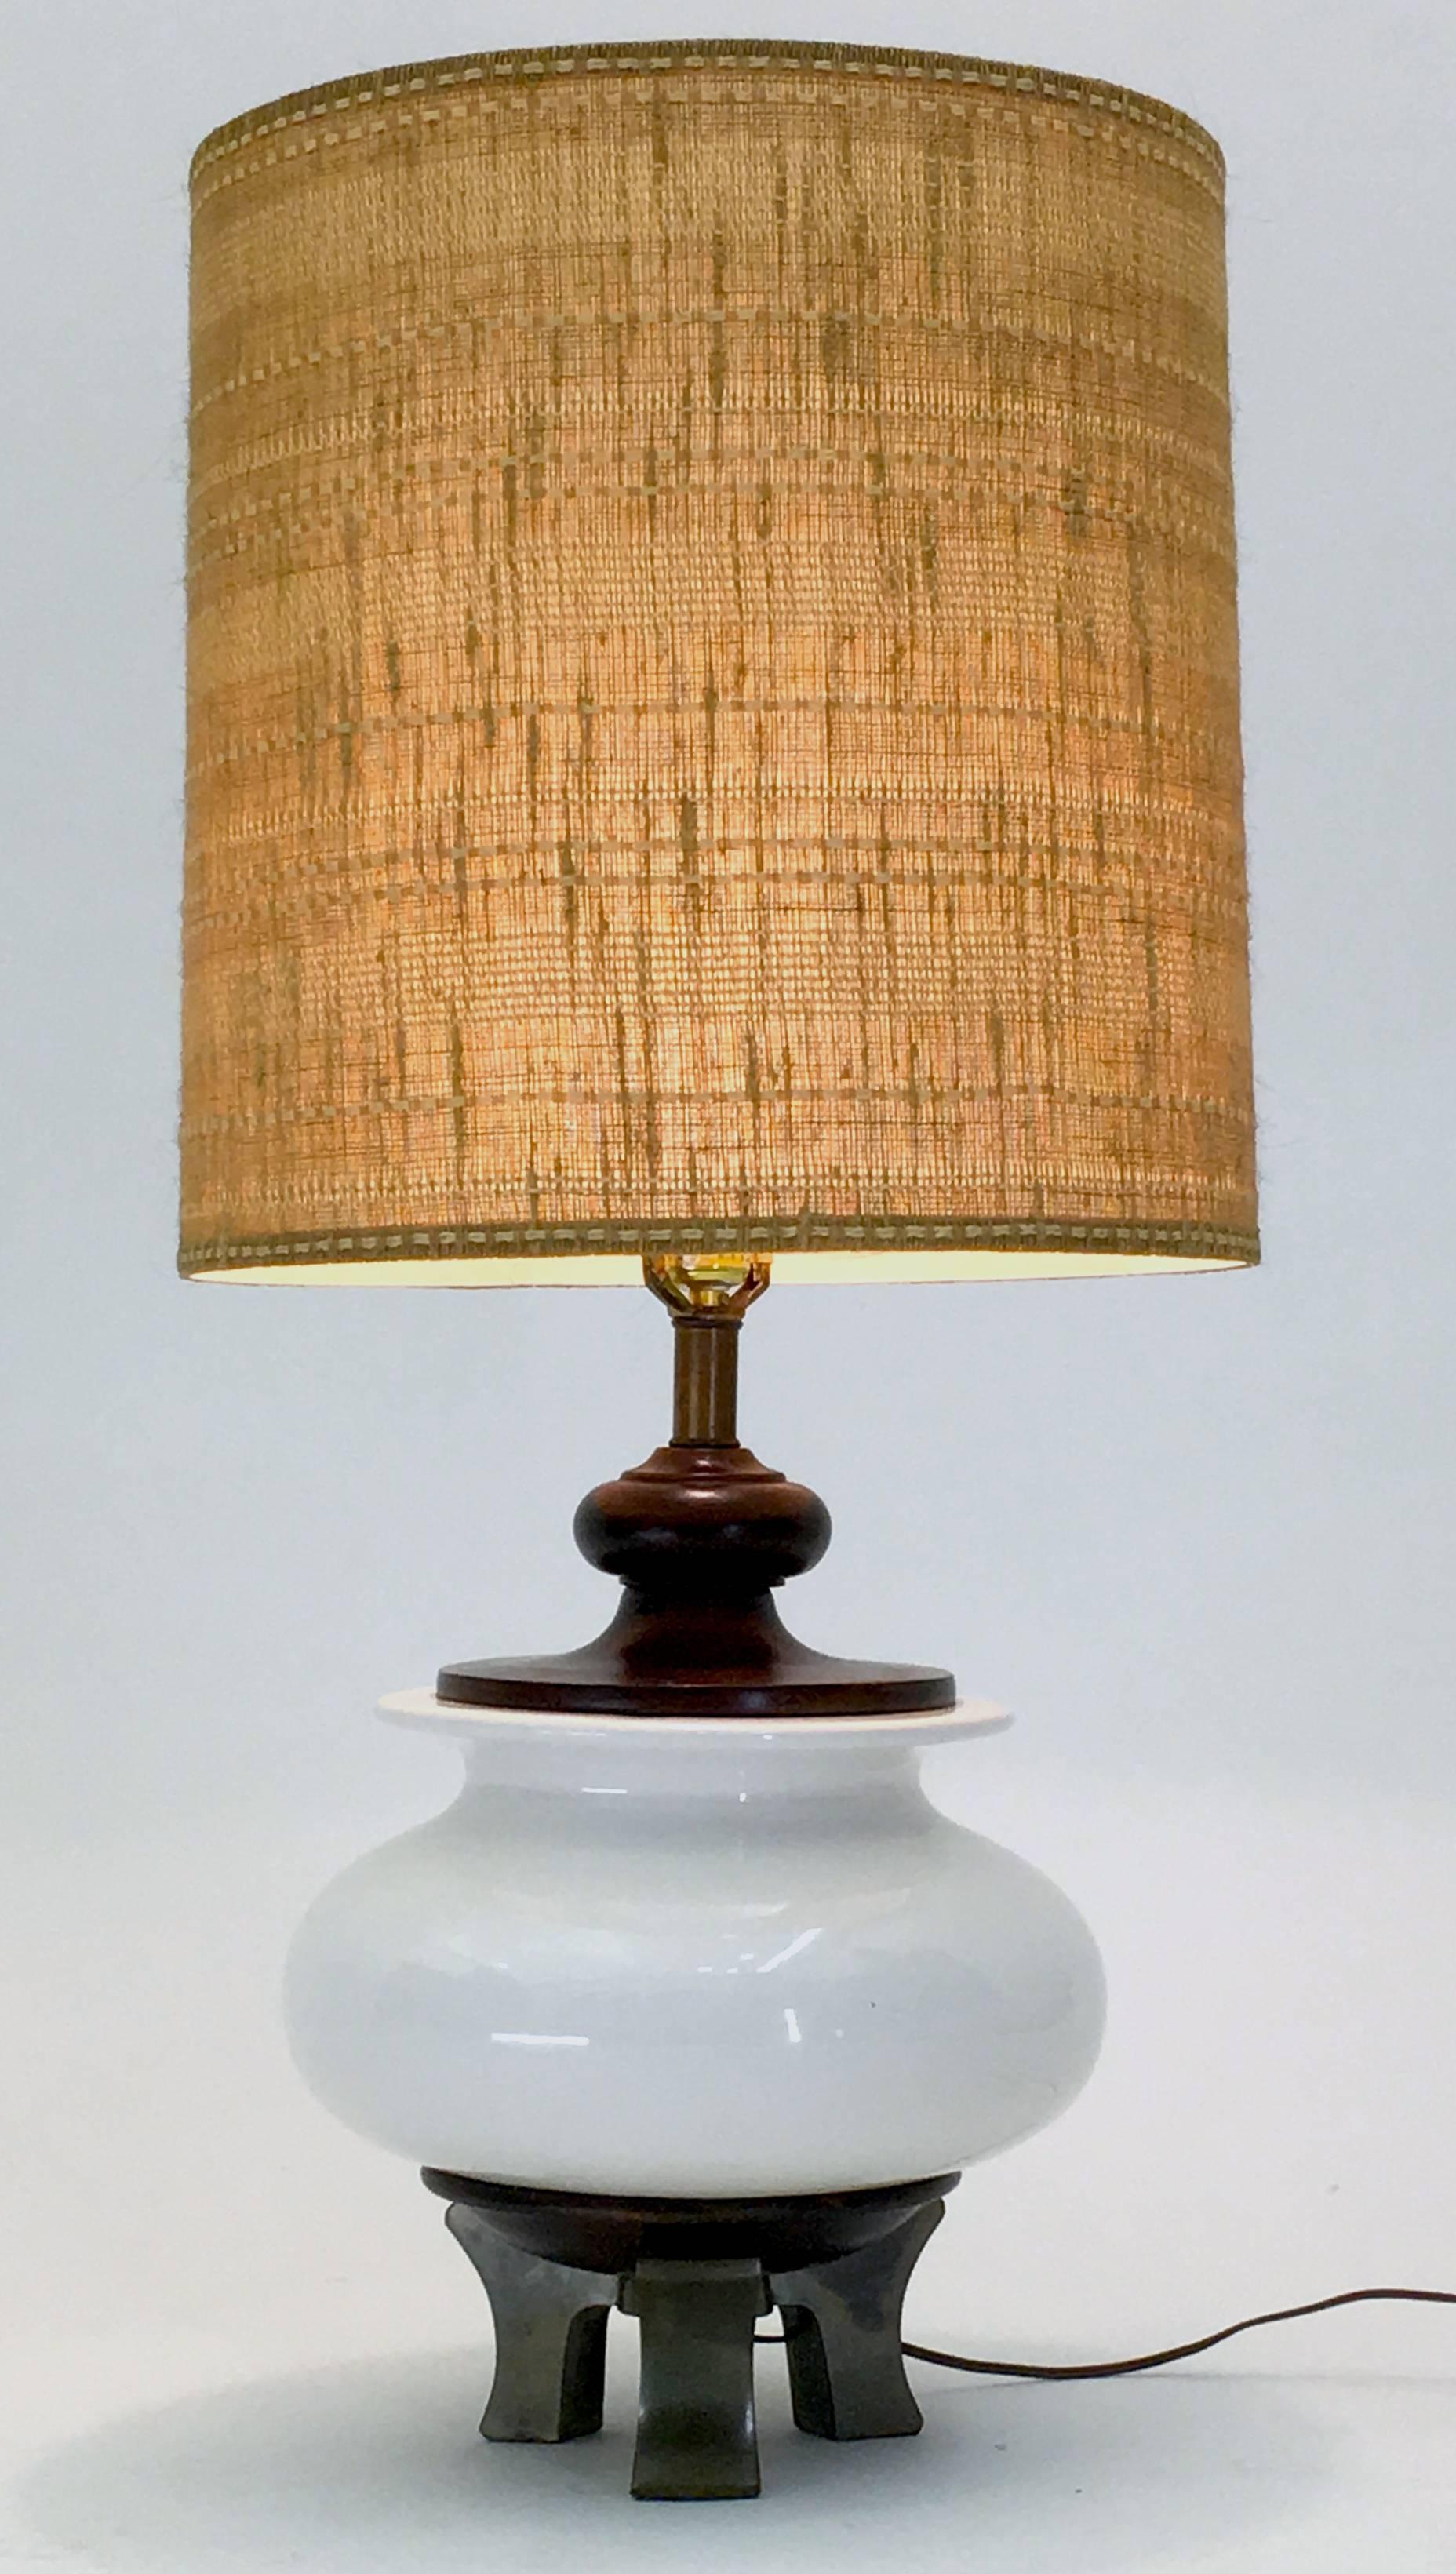 A very large bulbous ceramic vessel of 14" diameter upon a tripod or three legged base of brass designed and produced by Morris Greenspan. This is a unique lamp with beautiful wood accents to the top and bottom and with its lovely white glaze